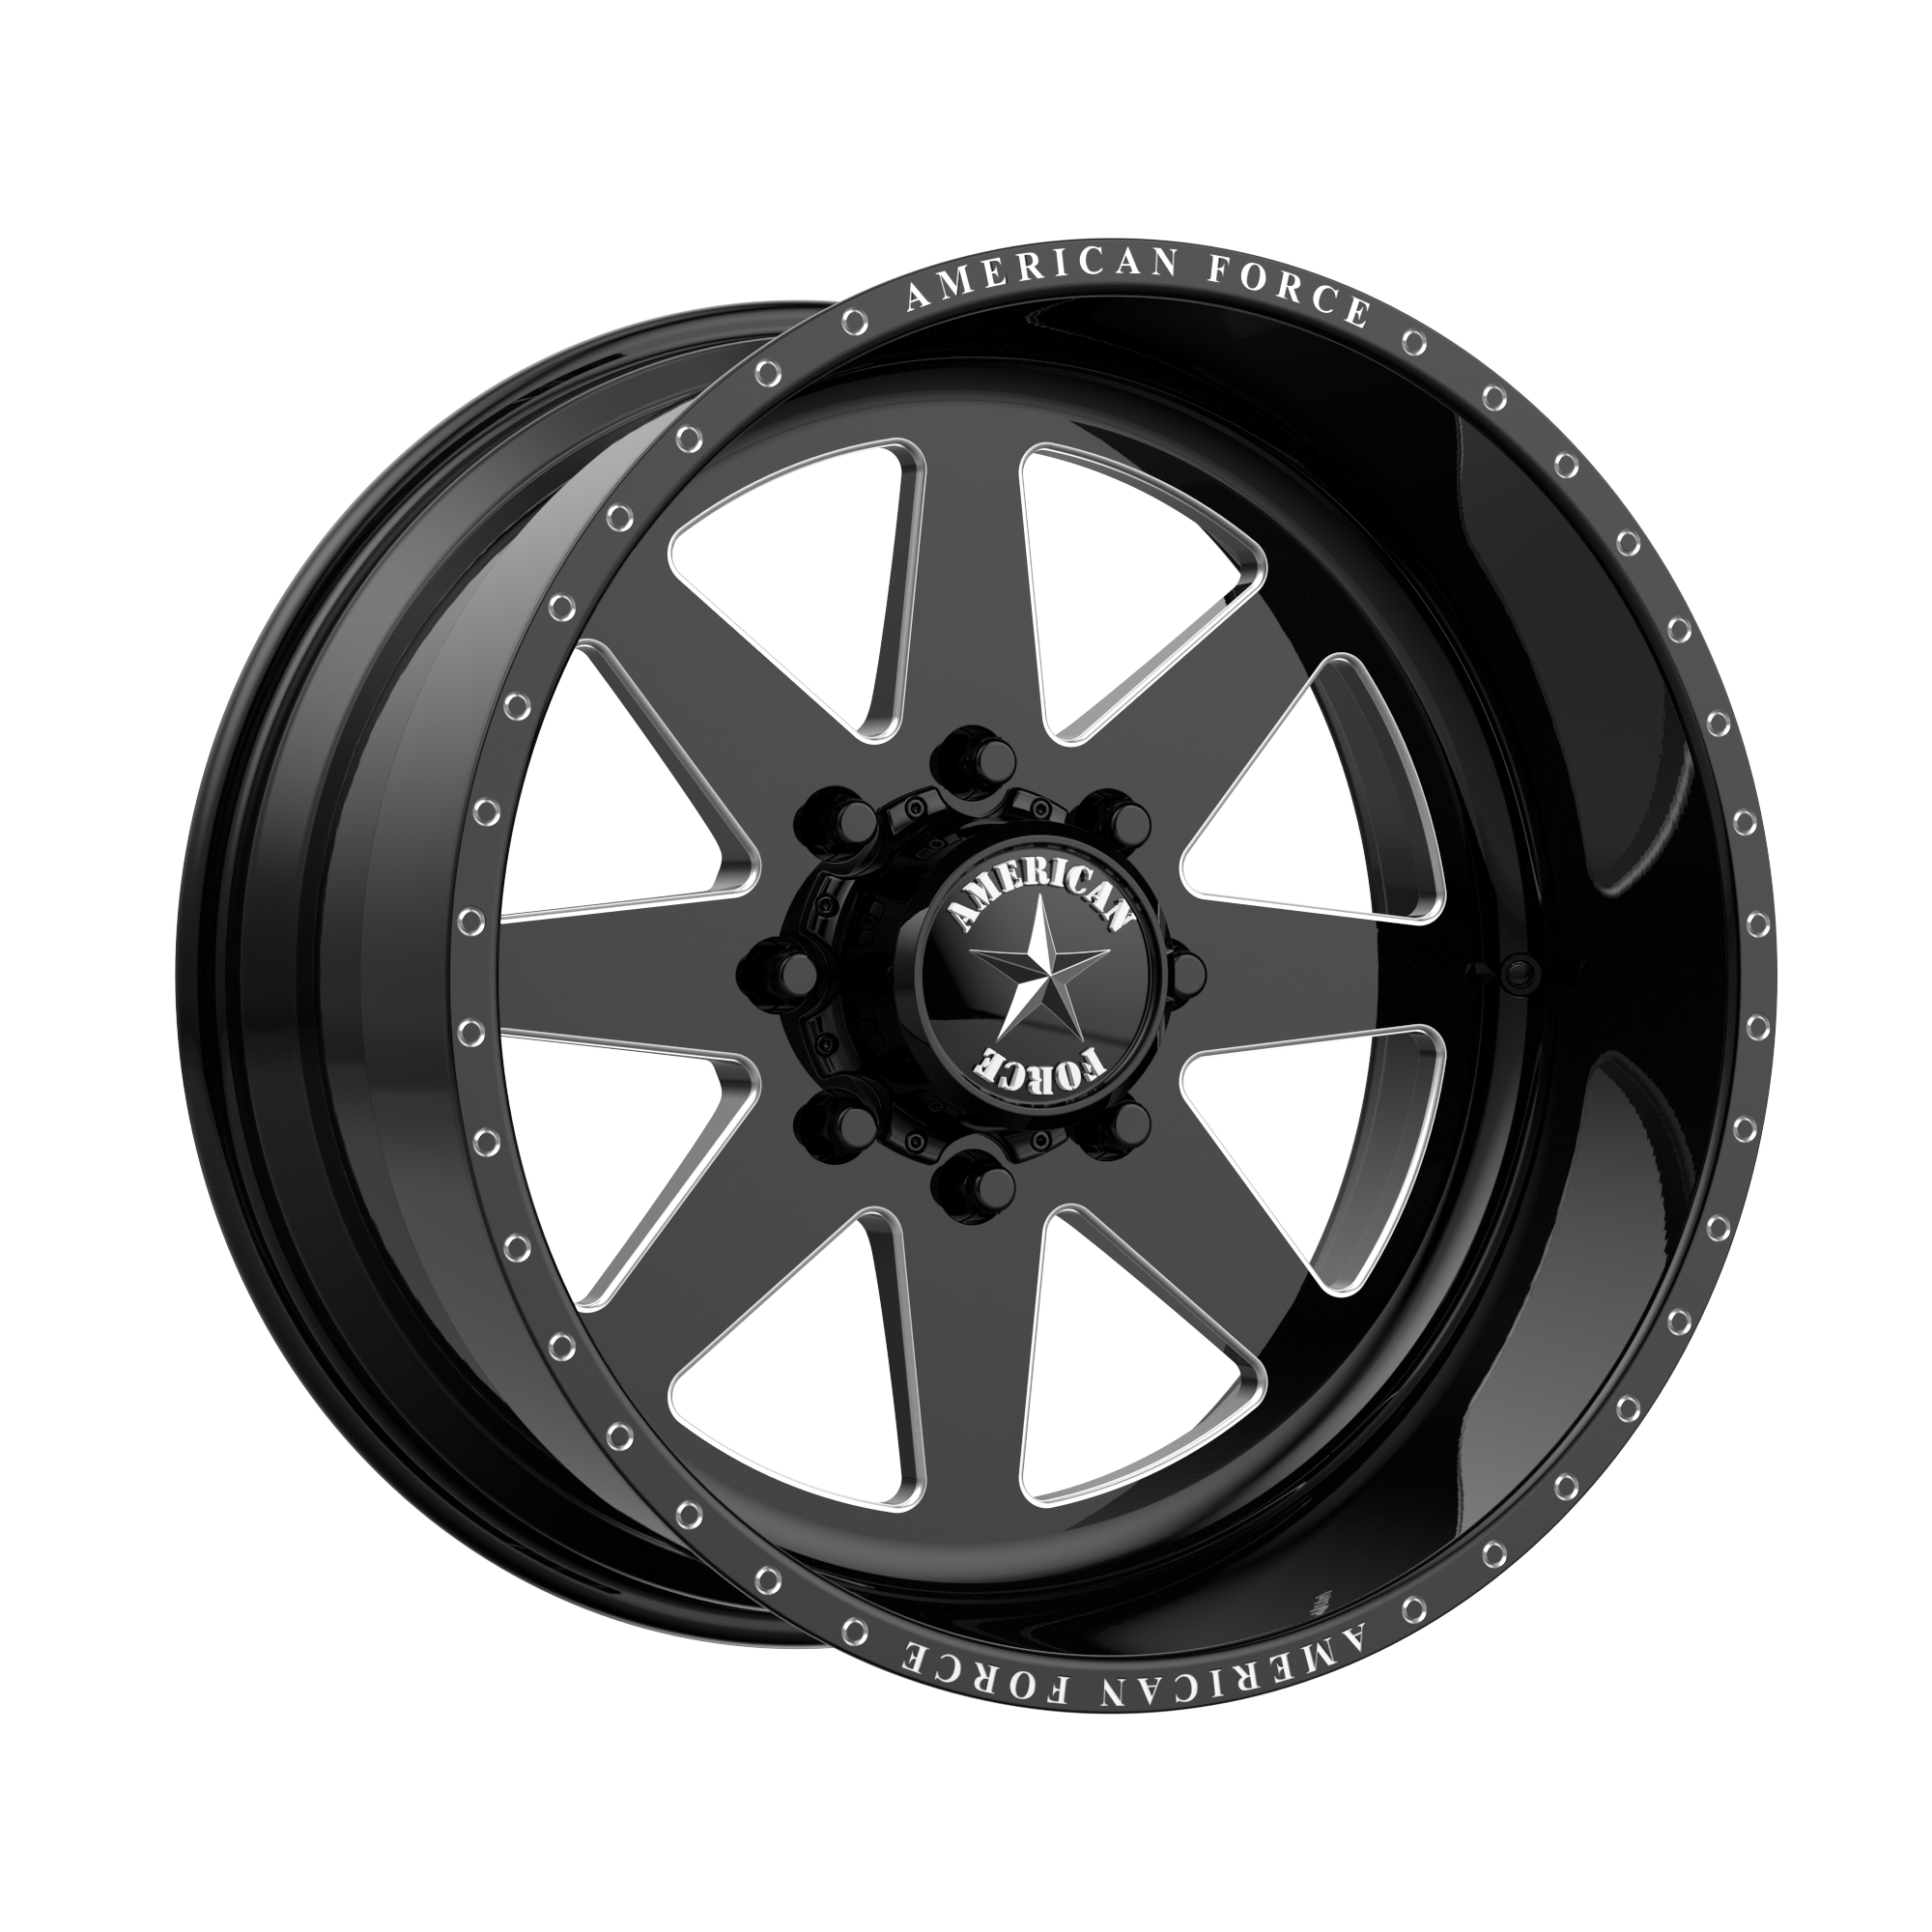 INDEPENDENCE SS 20x12 6x139.70 GLOSS BLACK MACHINED (-40 mm) - Tires and Engine Performance